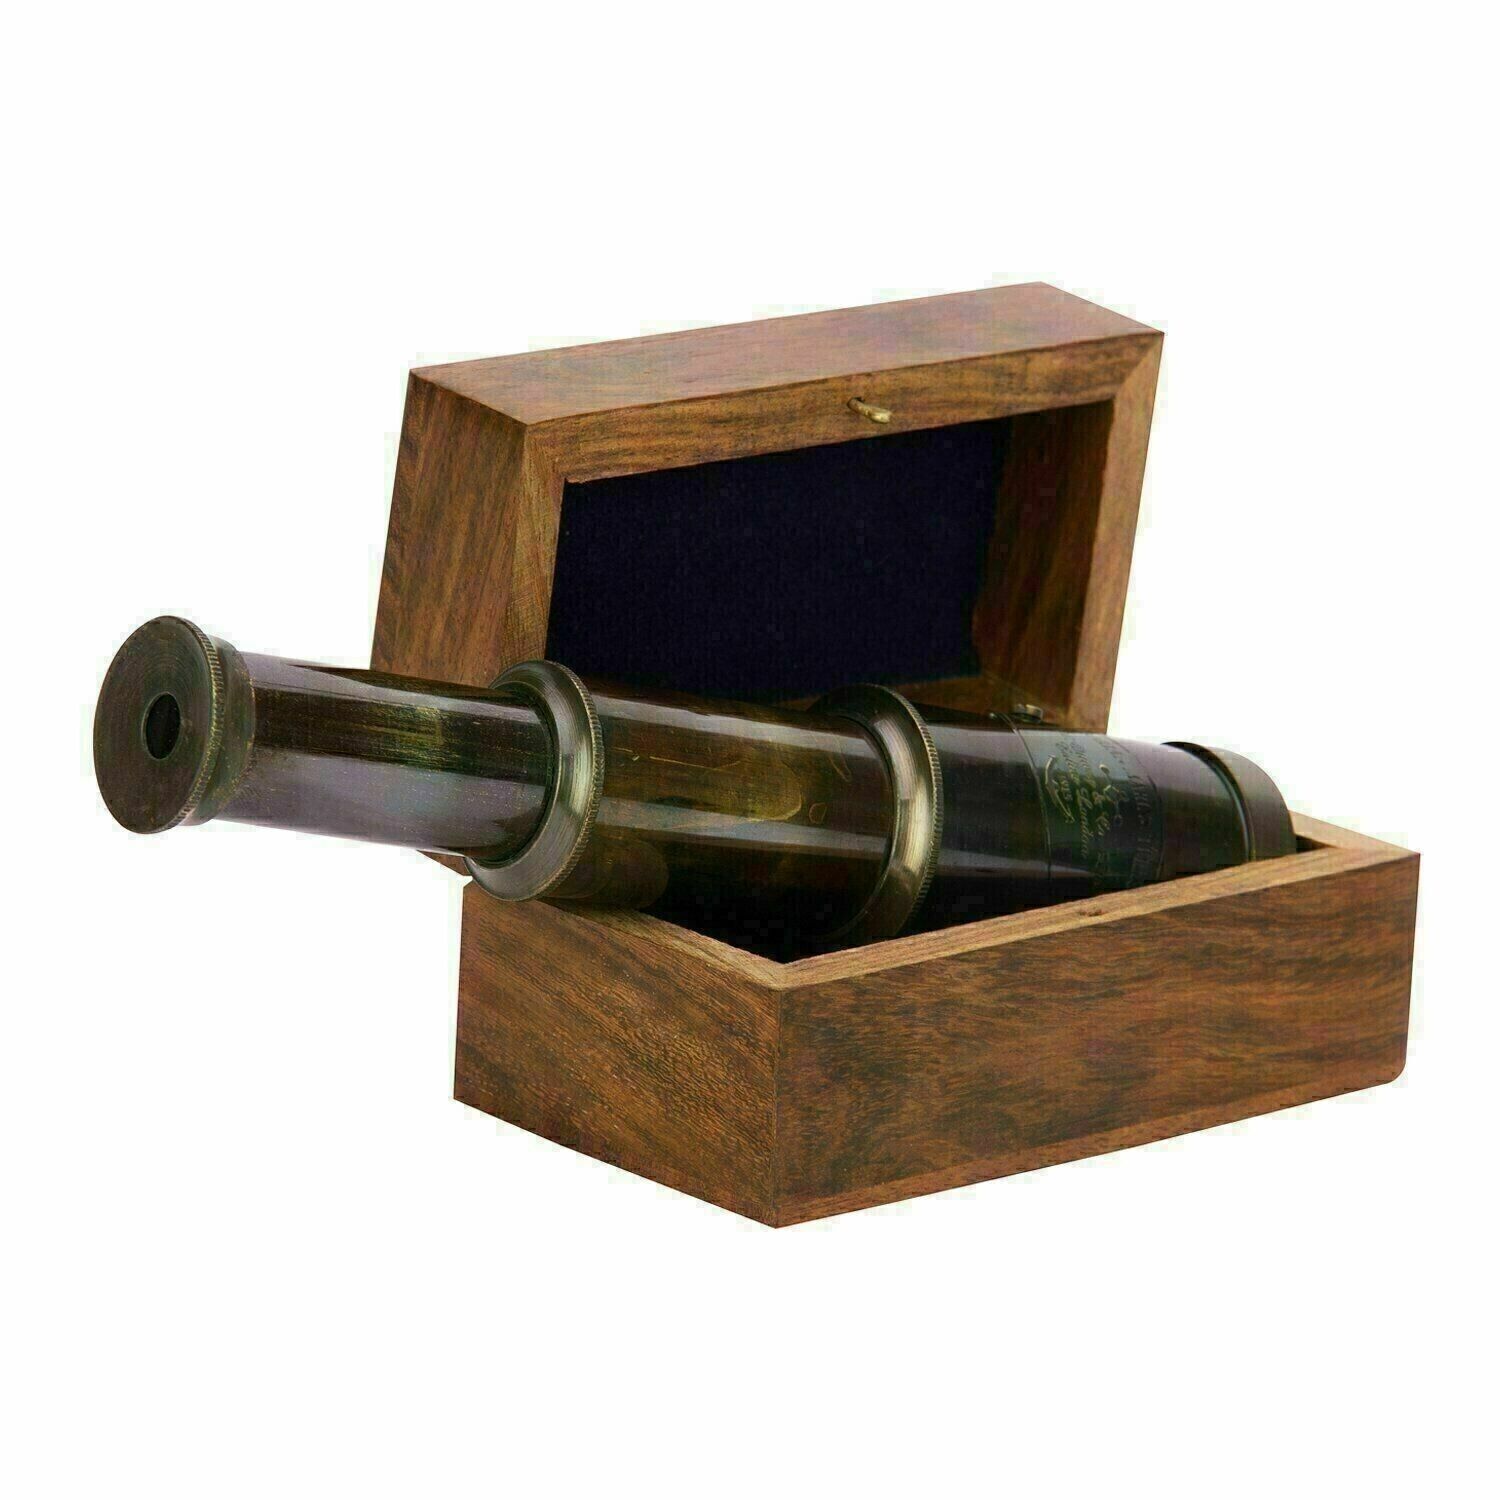 Primary image for Nautical Vintage Brass Antique Telescope With Wooden Box Collectible Gift Item